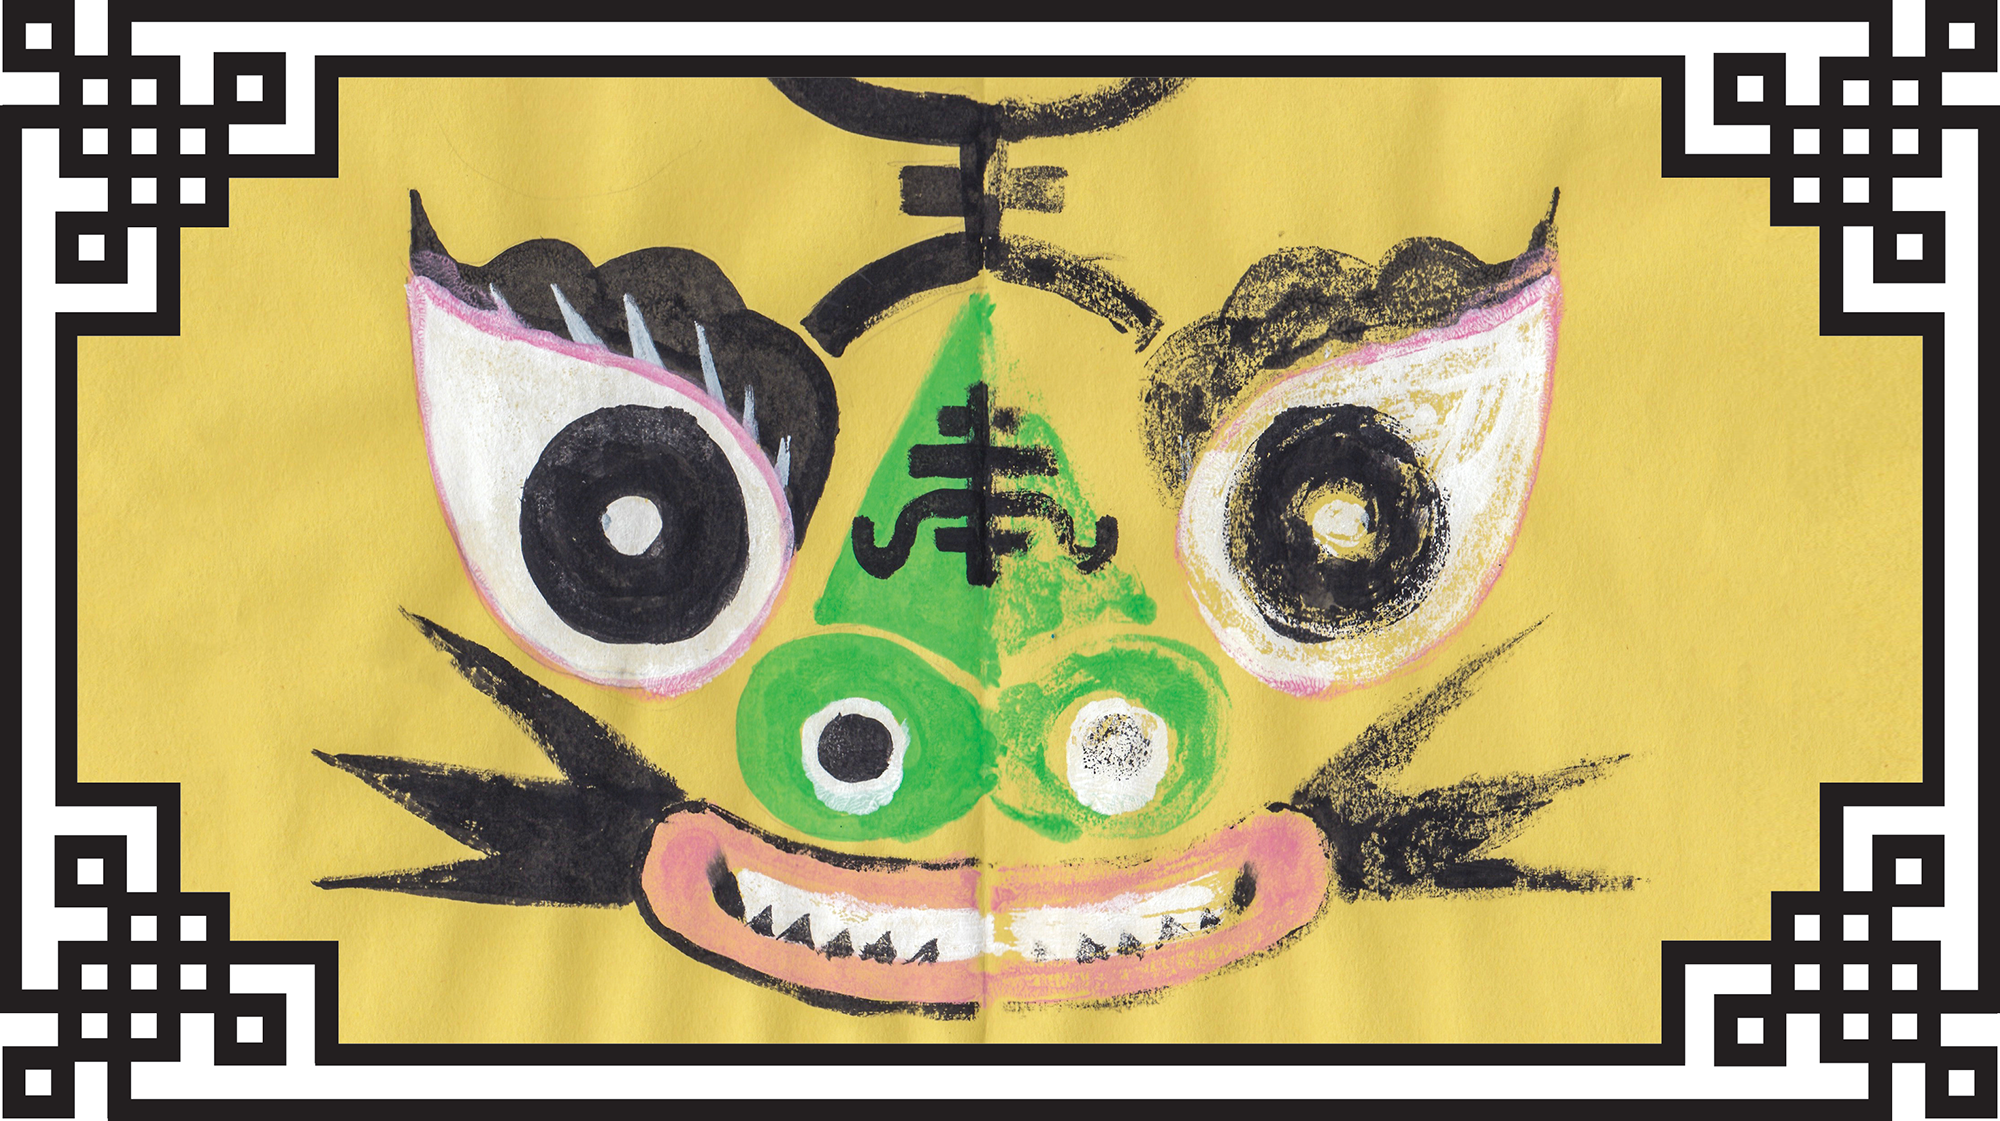 Landscape Yue Moon artwork of a colourful creature with big eyes and a green nose on a yellow background with a traditional Chinese black & white border around it.